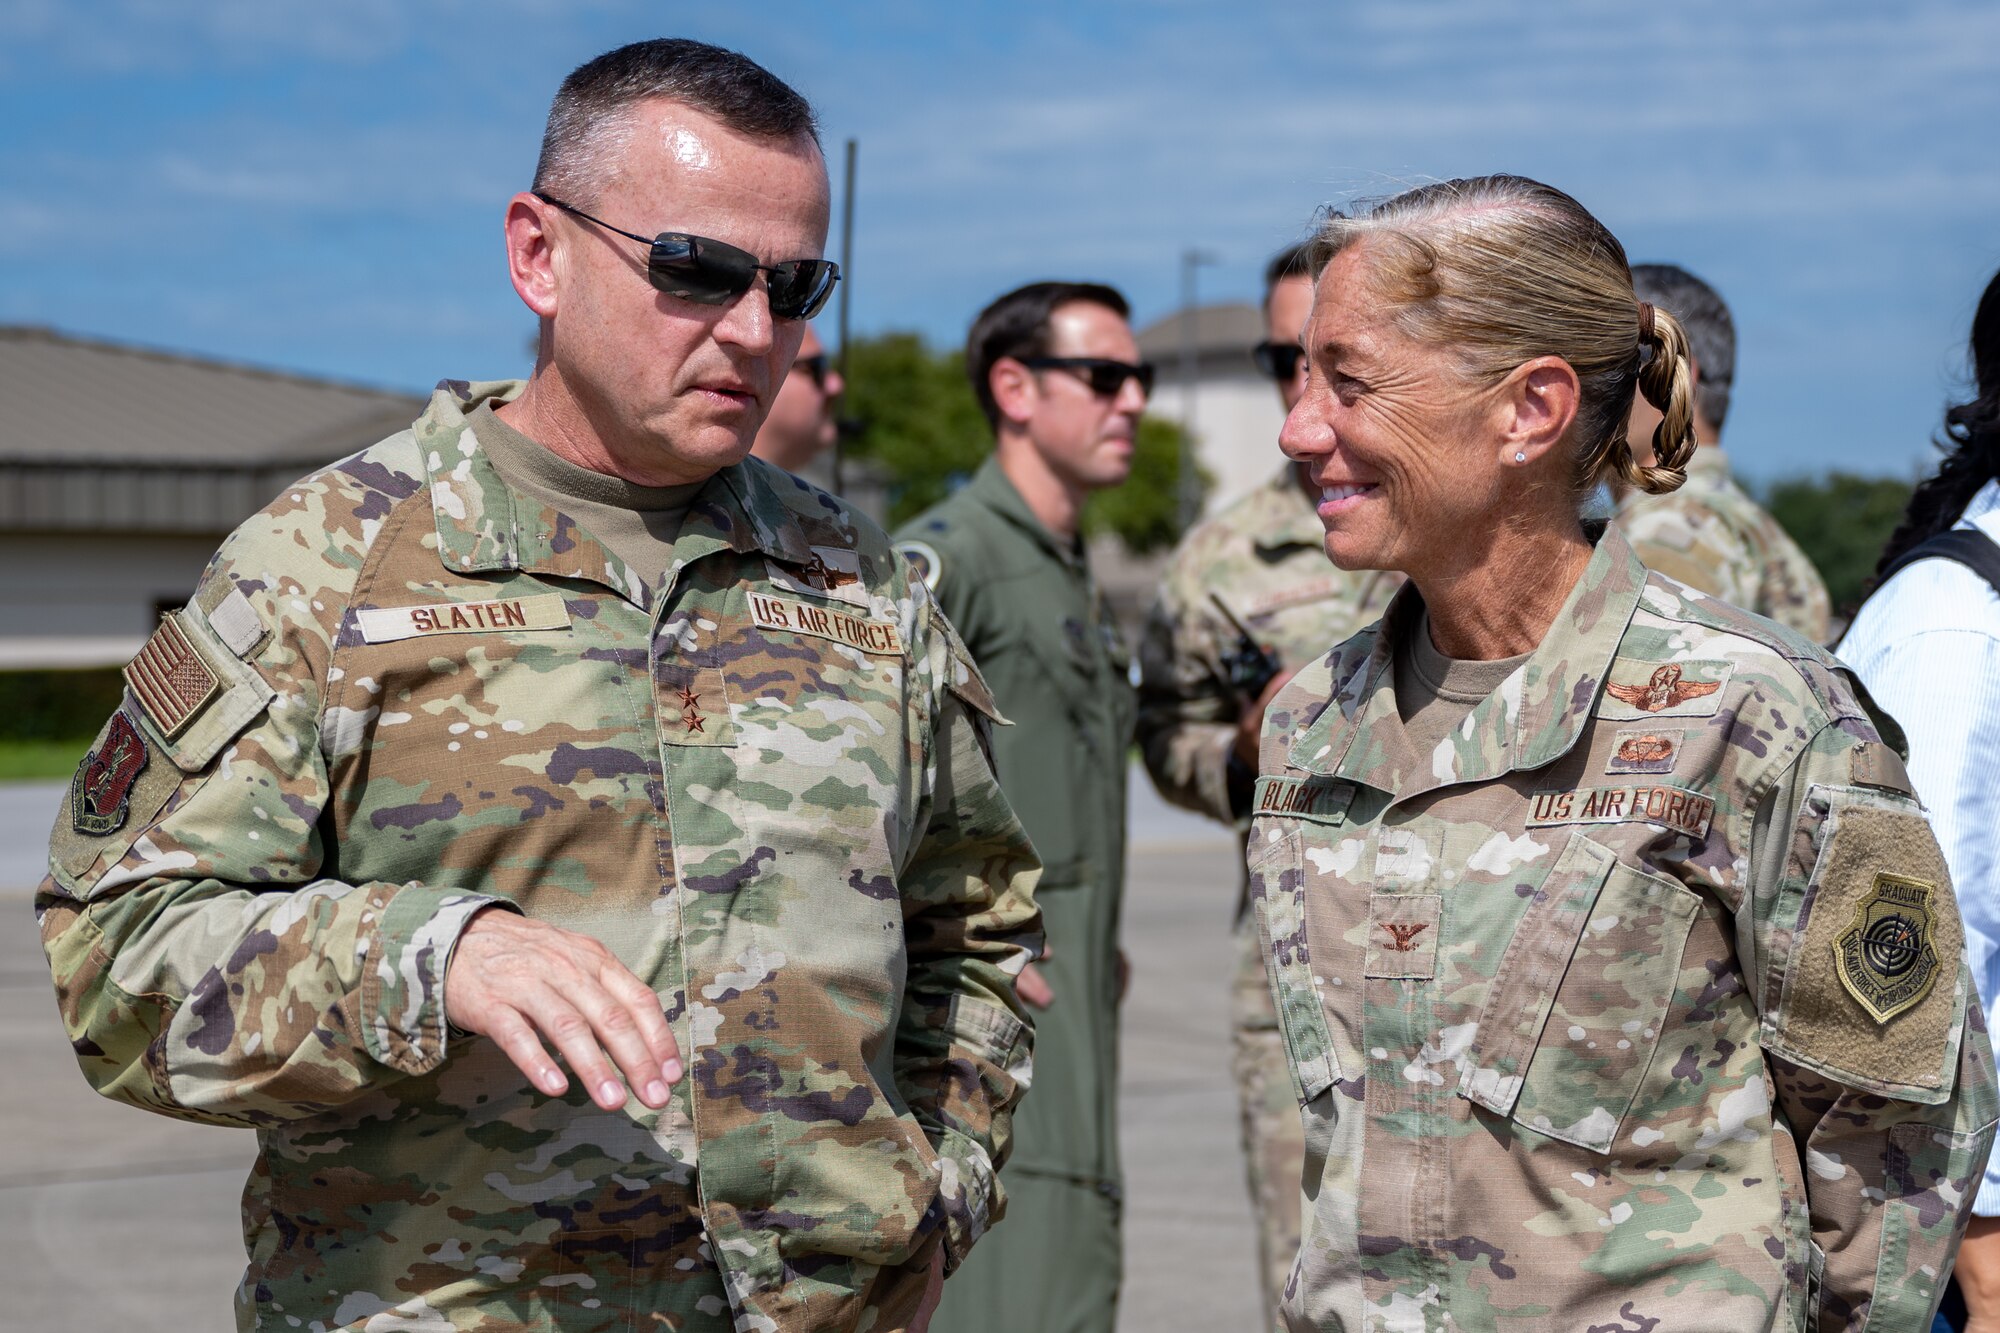 U.S. Air Force Maj. Gen. Darrin Slaten, Joint Civilian Orientation Conference senior military advisor, left, and U.S. Air Force Col. Allison Black, 1st Special Operations Wing commander, participate in the 94th JCOC at Hurlburt Field, Florida, Sept. 21, 2023. JCOC is the Department of Defense’s public liaison program, designed to provide American business and community leaders with a deeper understanding of the military by showcasing the rewards and challenges service members face both on and off the battlefield. (U.S. Air Force photo by Airman 1st Class Hussein Enaya)